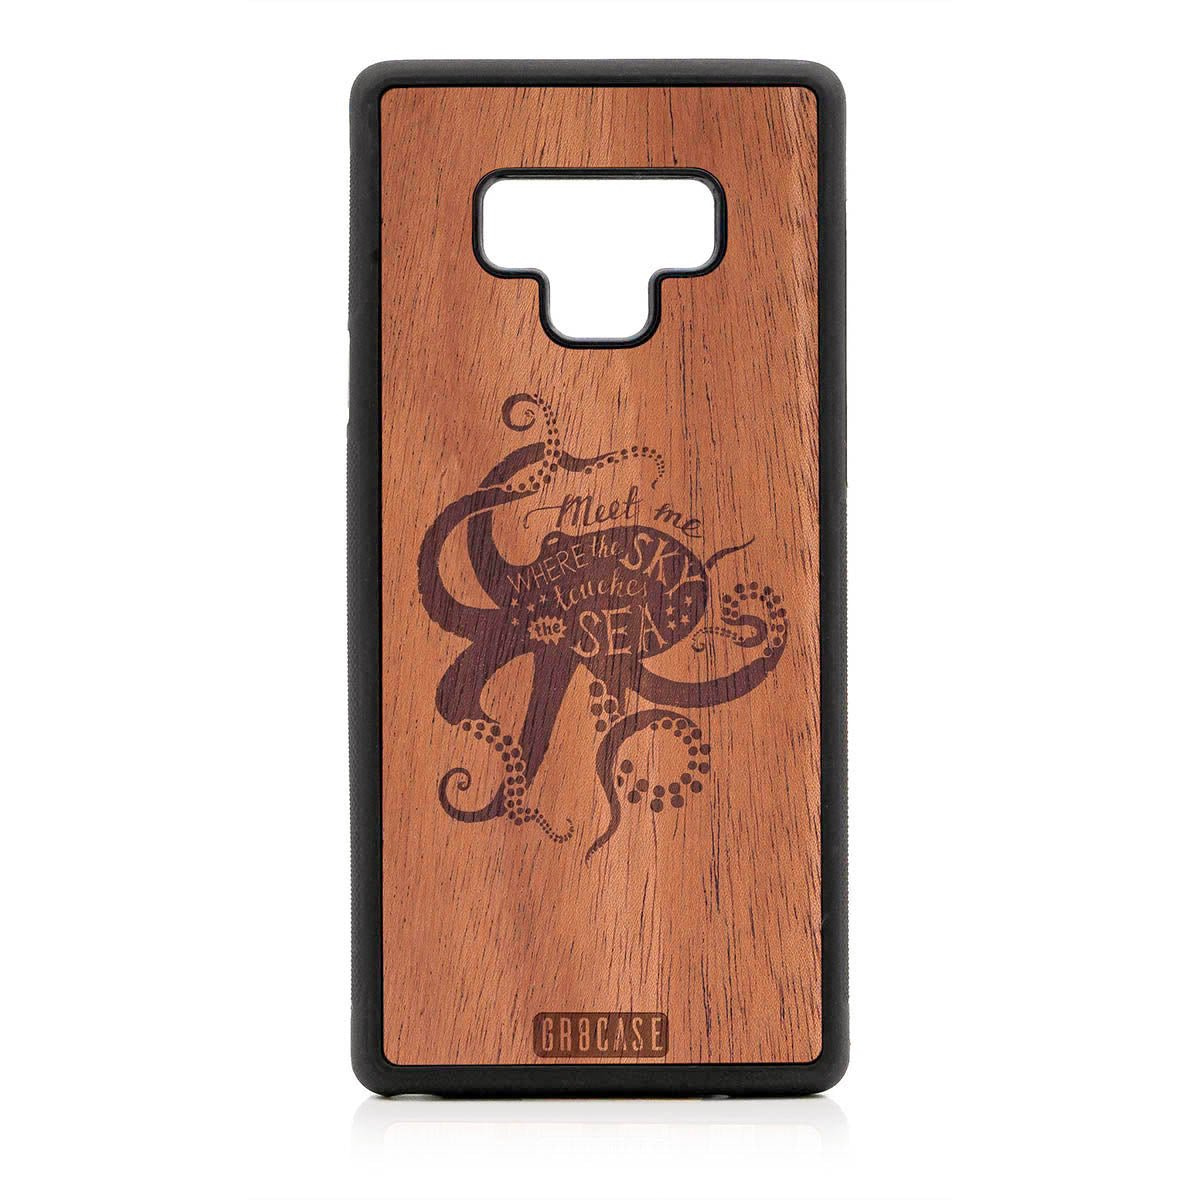 Meet Me Where The Sky Touches The Sea (Octopus) Design Wood Case For Samsung Galaxy Note 9